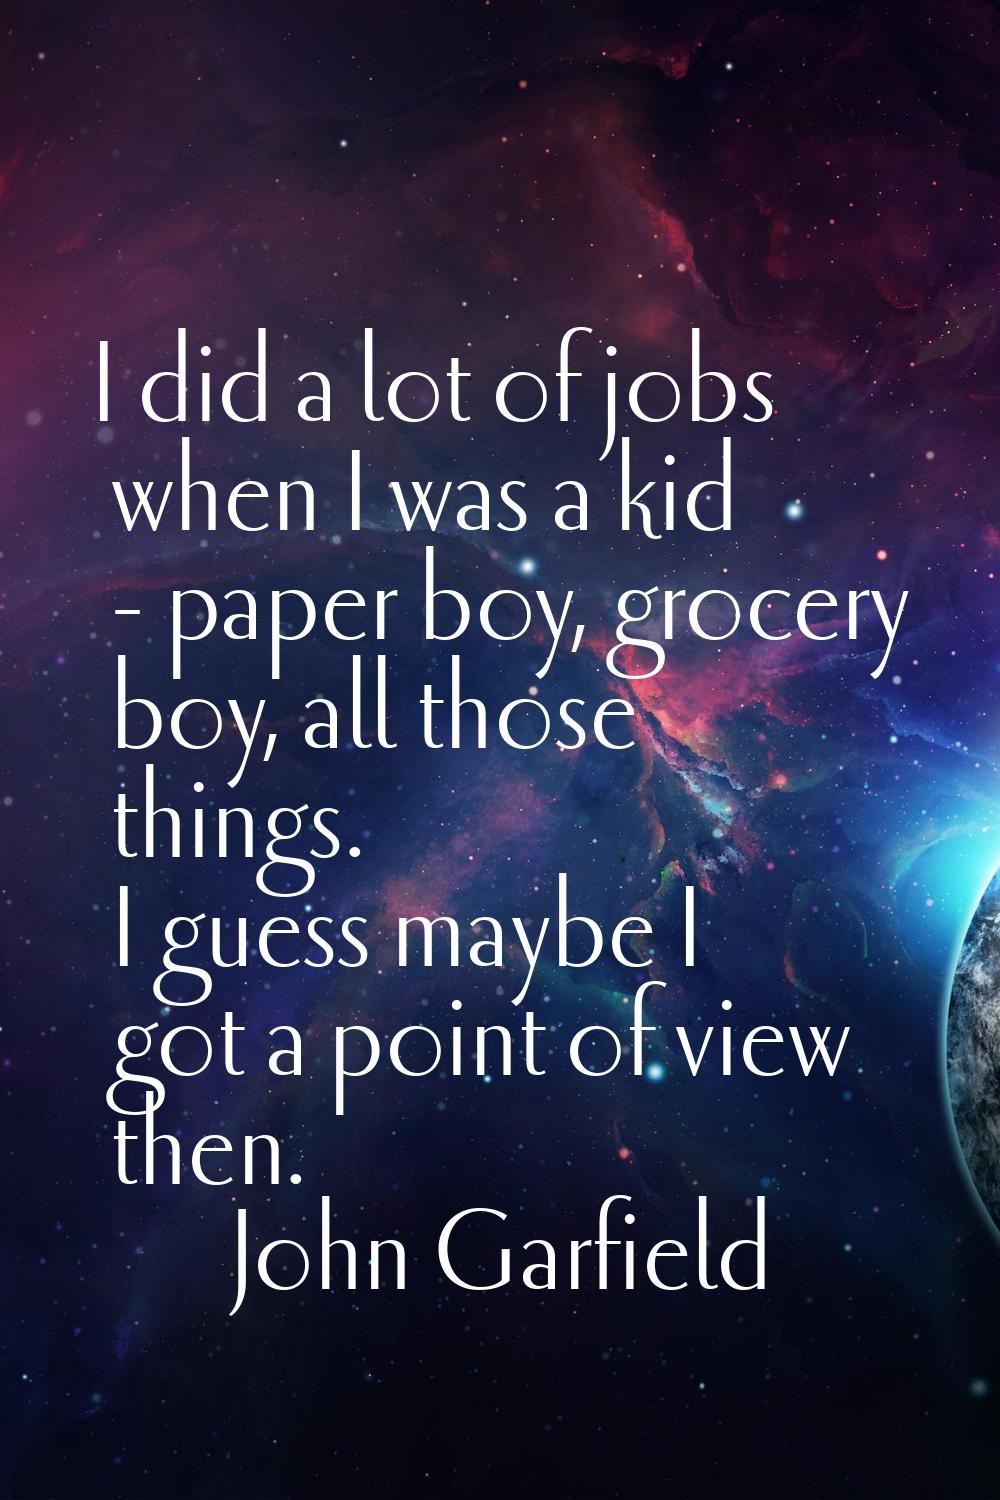 I did a lot of jobs when I was a kid - paper boy, grocery boy, all those things. I guess maybe I go